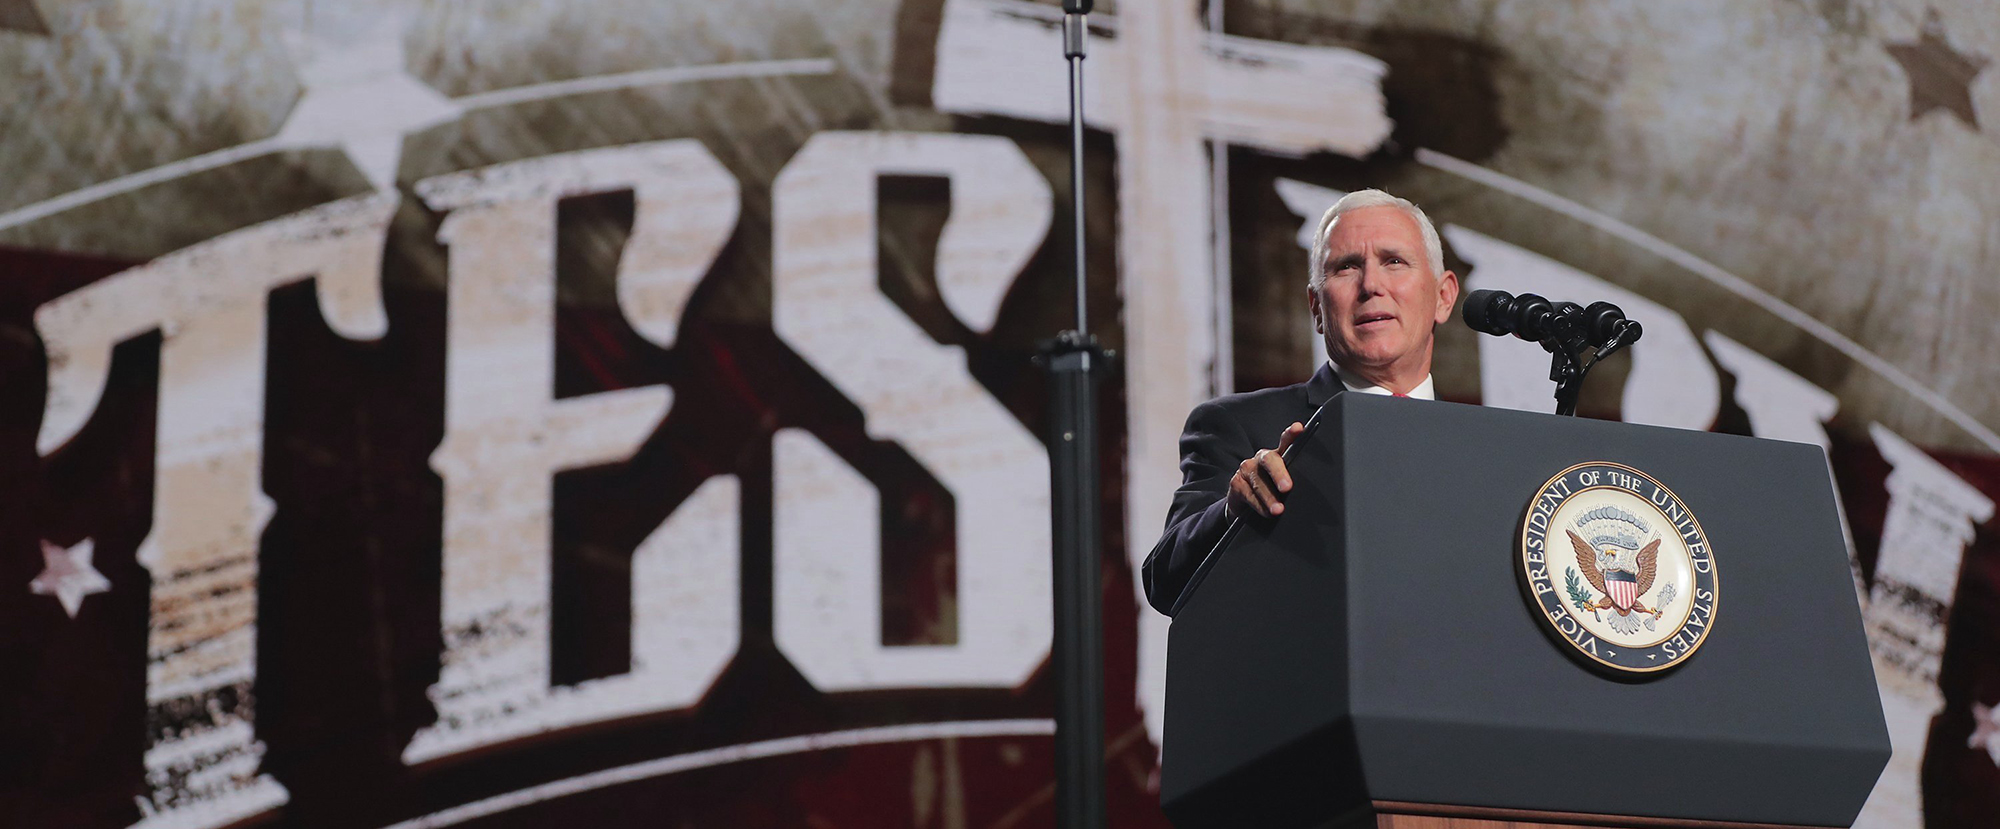 Pence will speak at luncheon during SBC annual meeting